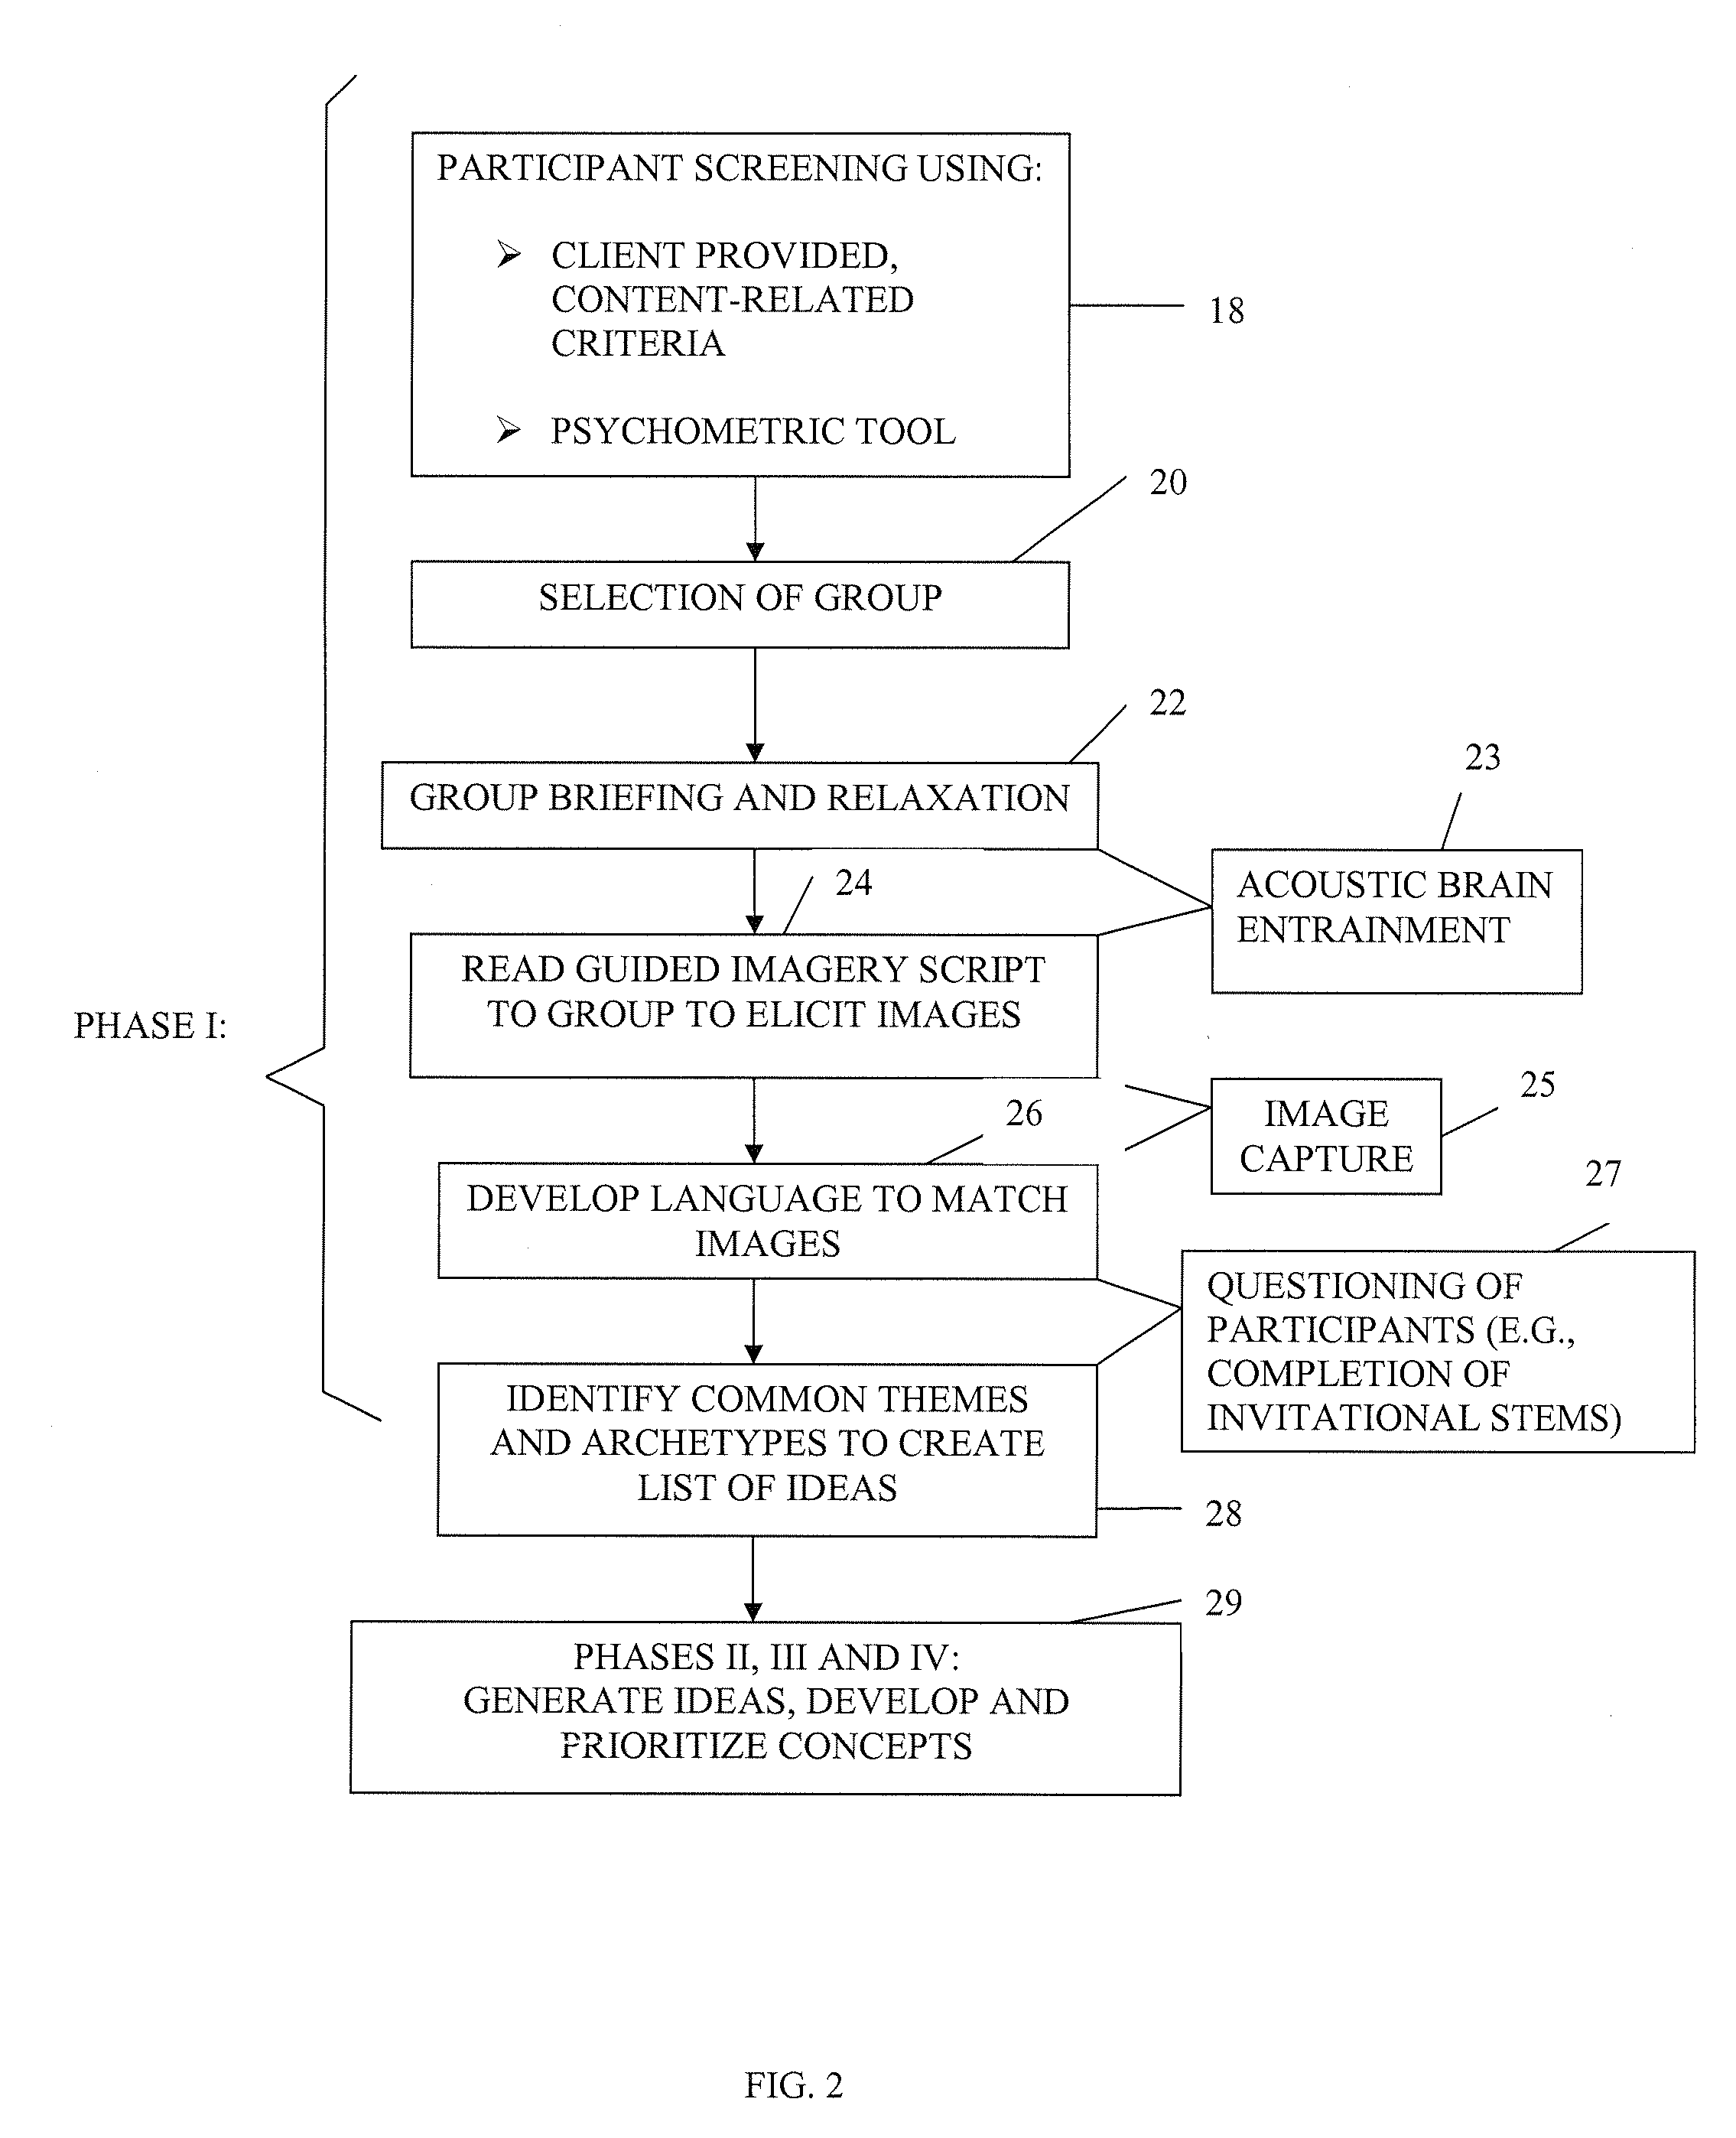 Method of Identifying and Prioritizing New Product Concepts and Development